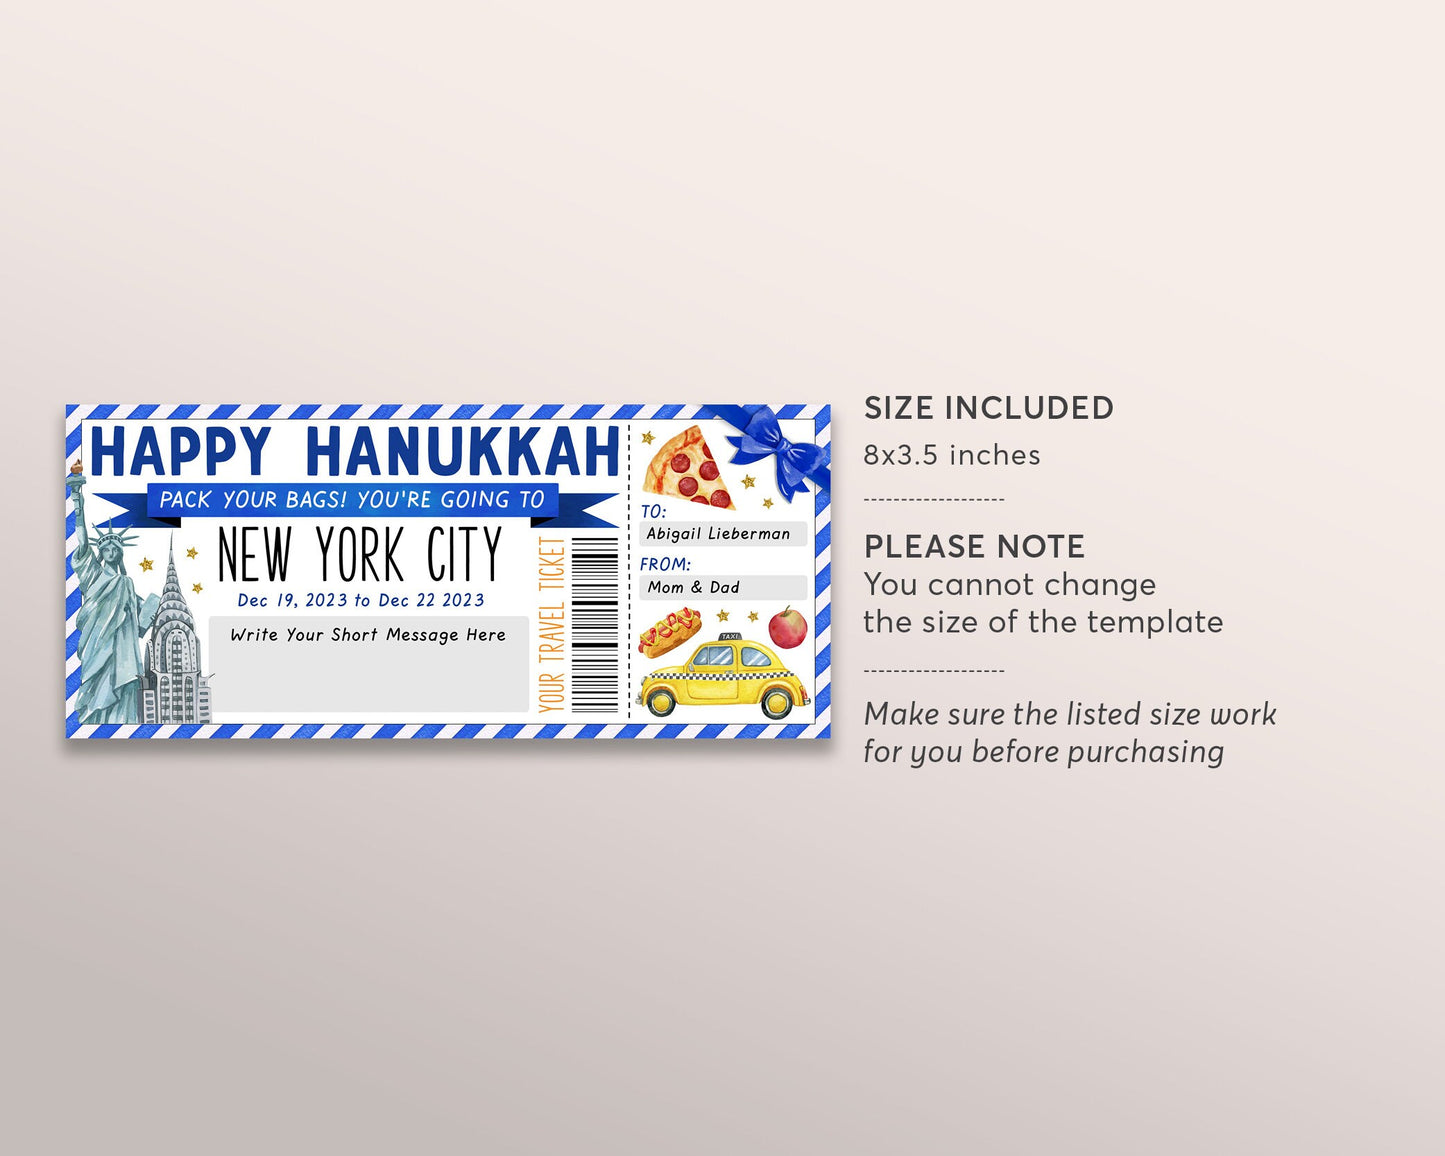 Hanukkah New York City Trip Ticket Editable Template, Surprise Chanukah Travel Vacation Gift Certificate, NYC Trip Reveal, Pack Your Bags